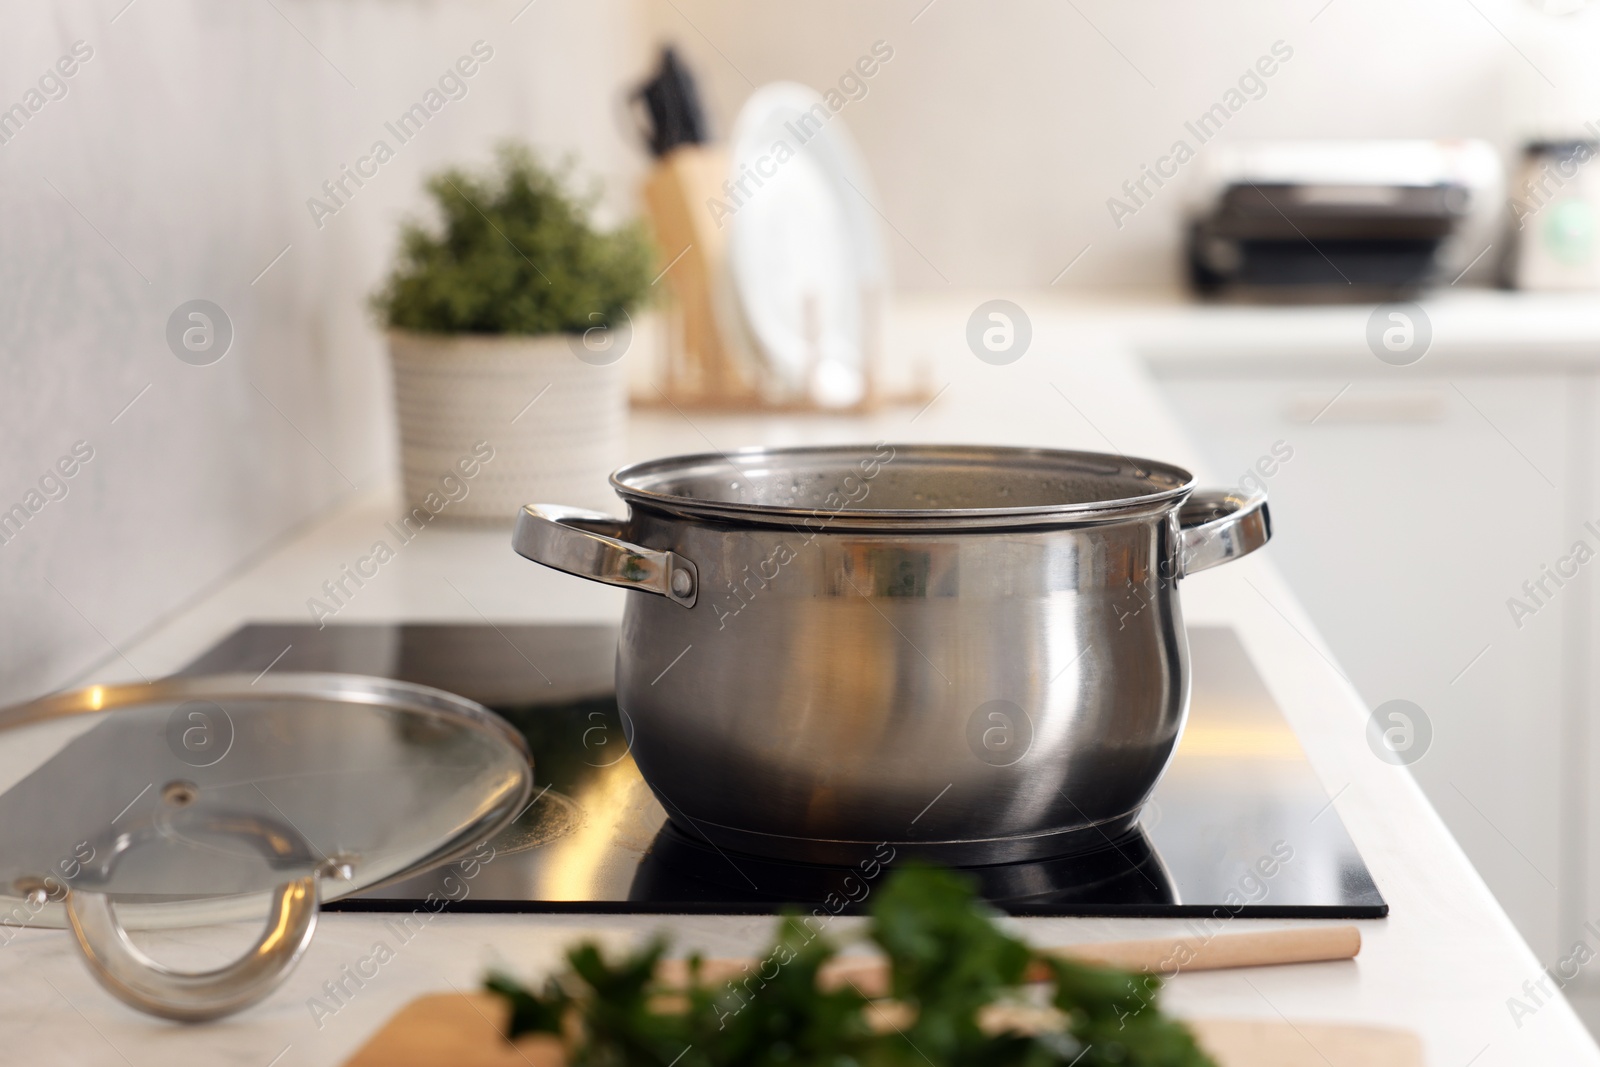 Photo of Pot with tasty soup on cooktop in kitchen